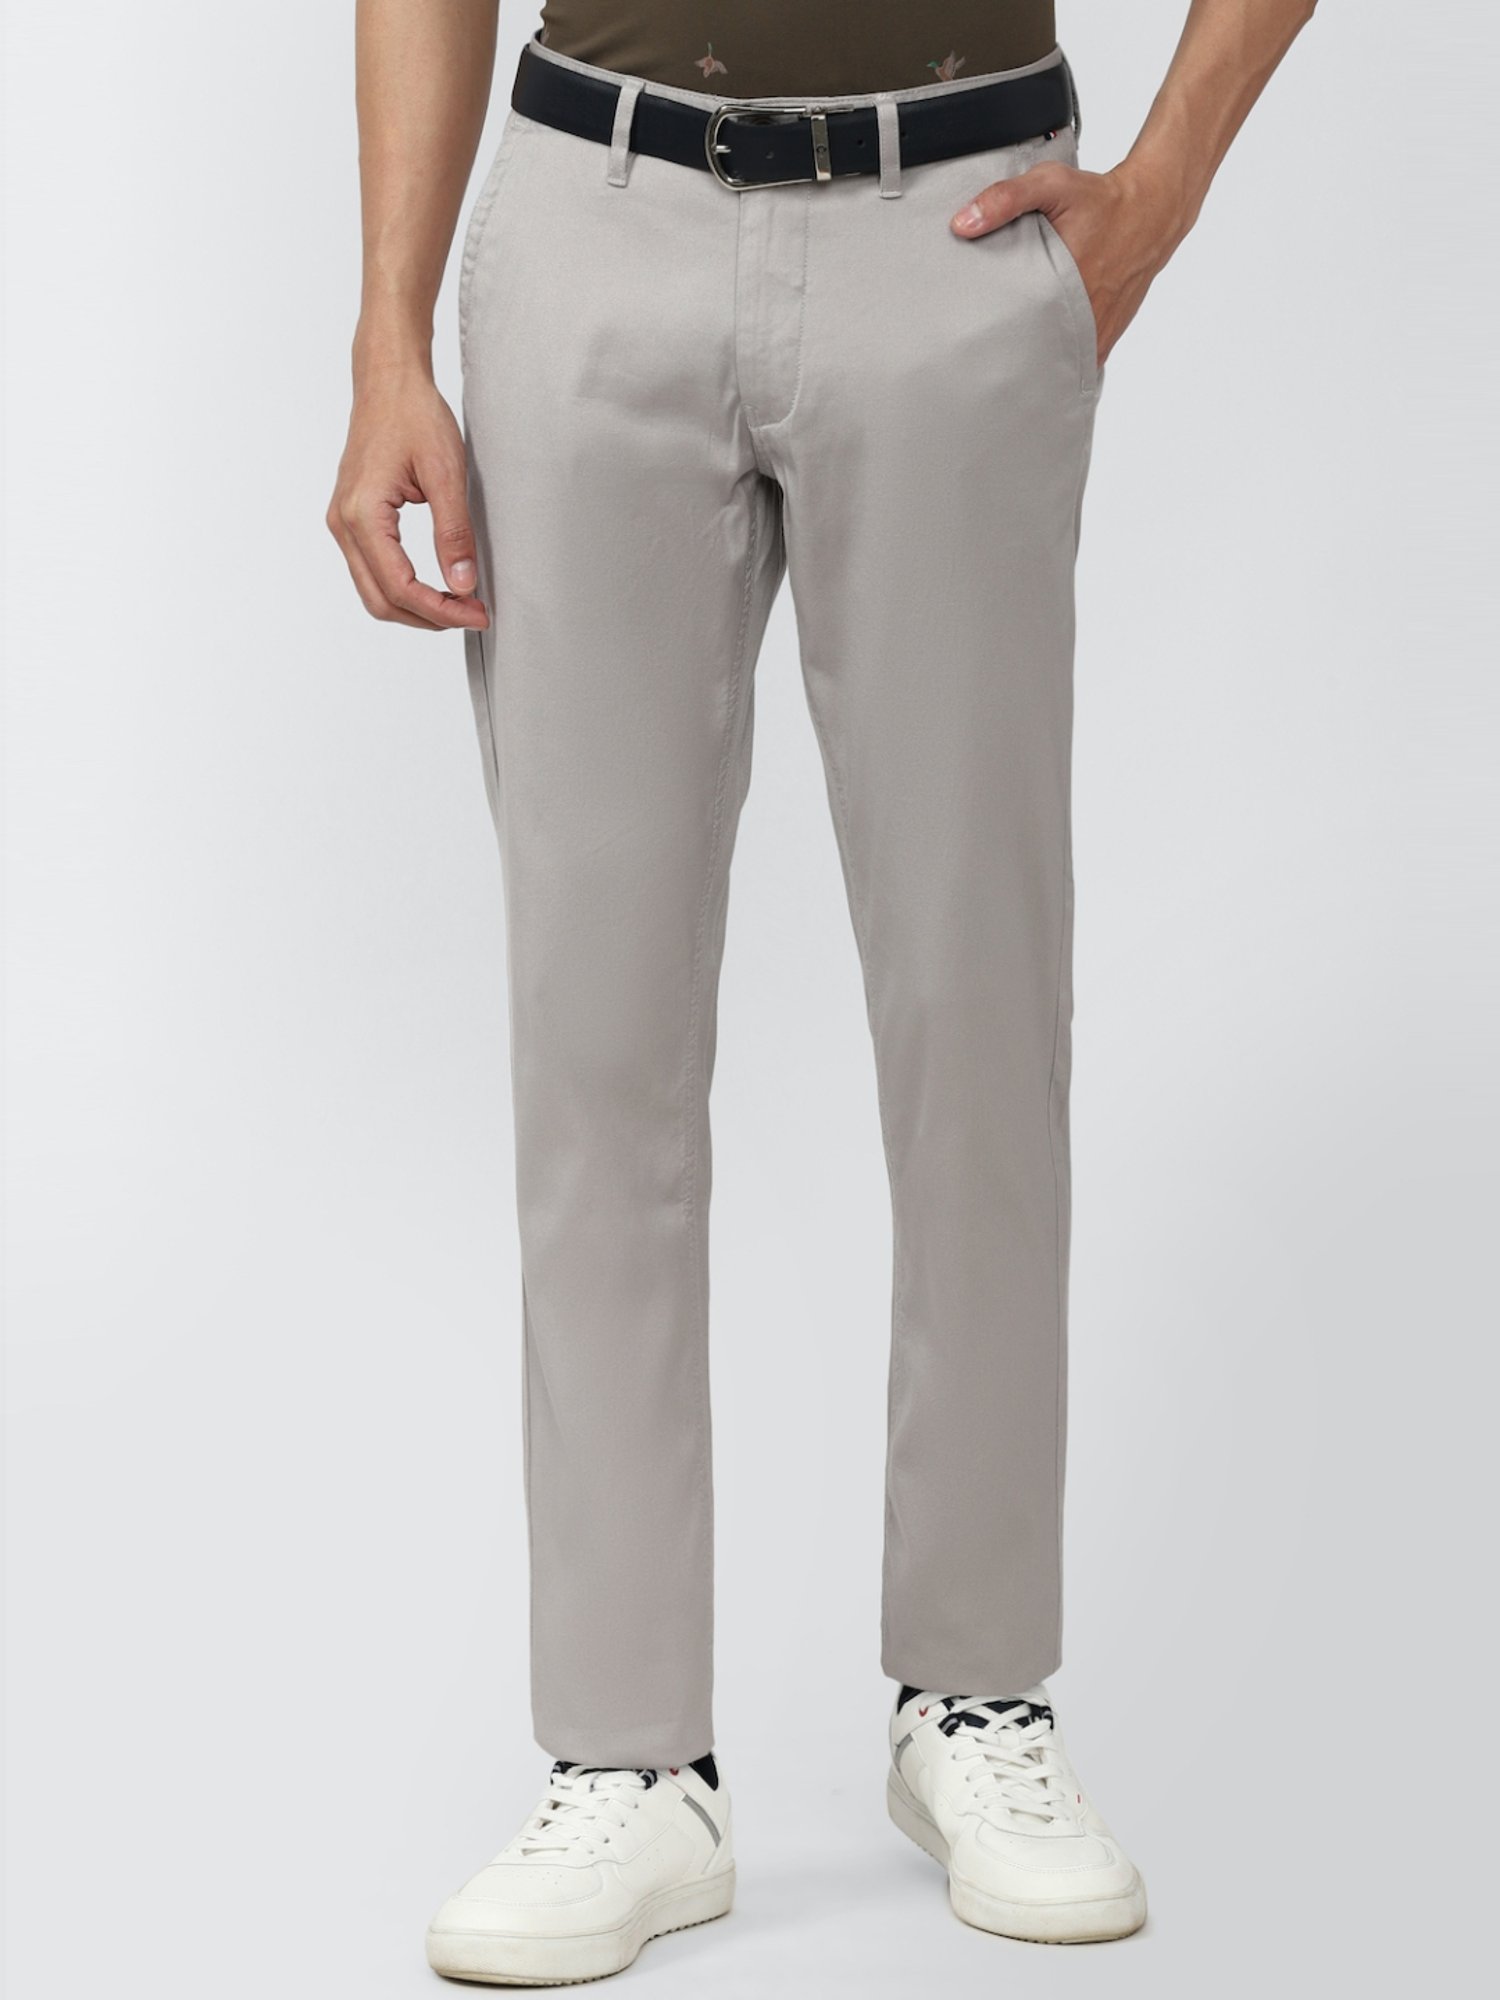 United Colors Of Benetton Casual Trousers  Buy United Colors Of Benetton Mens  Slim Fit Chinos Grey Online  Nykaa Fashion